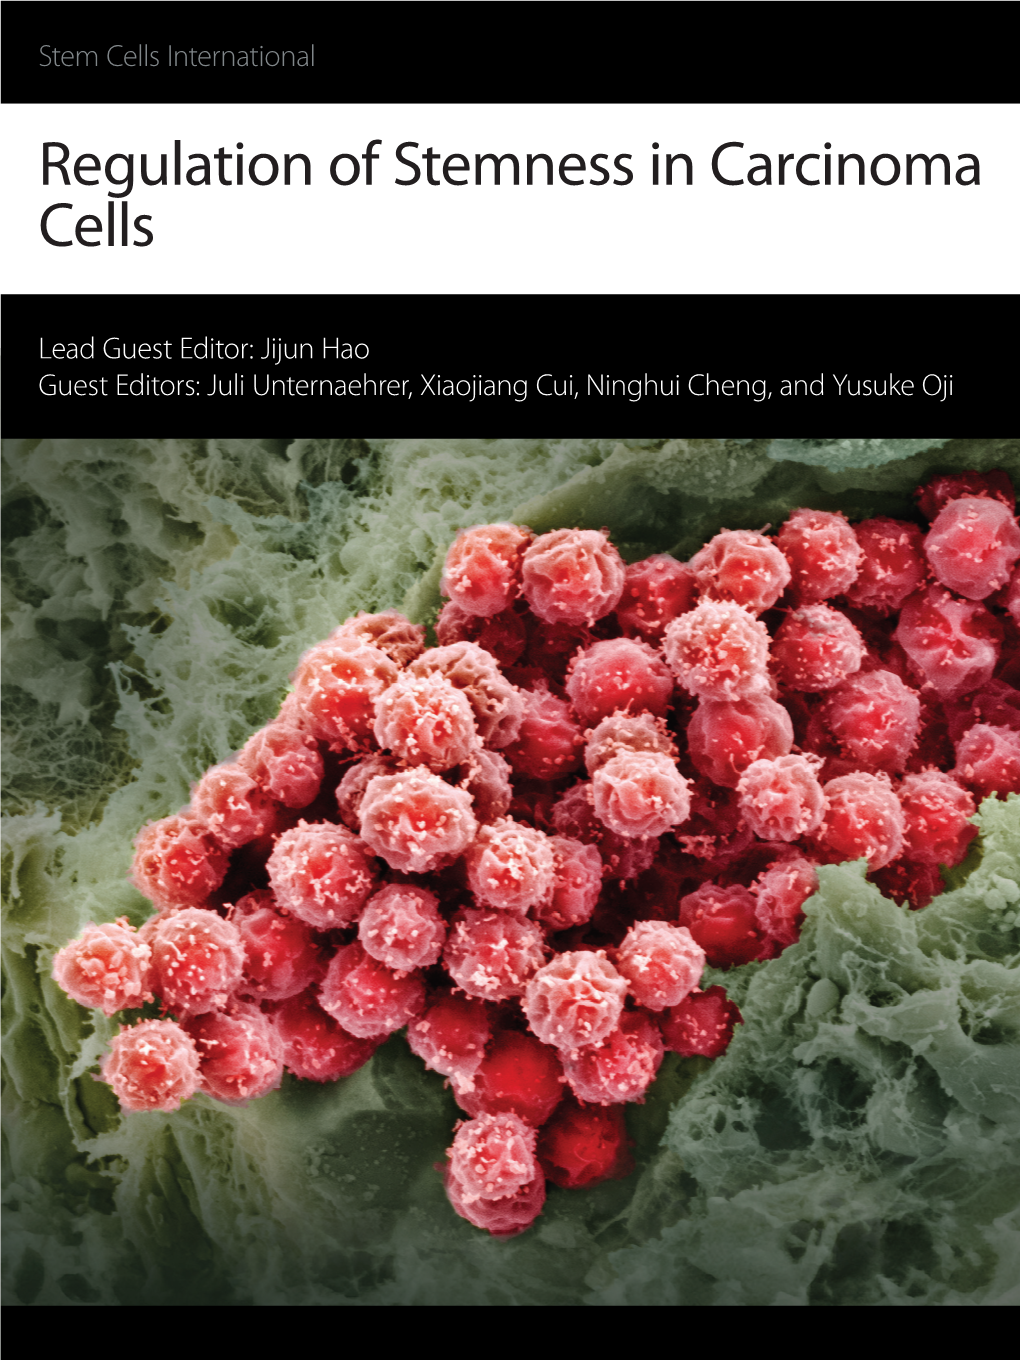 Regulation of Stemness in Carcinoma Cells